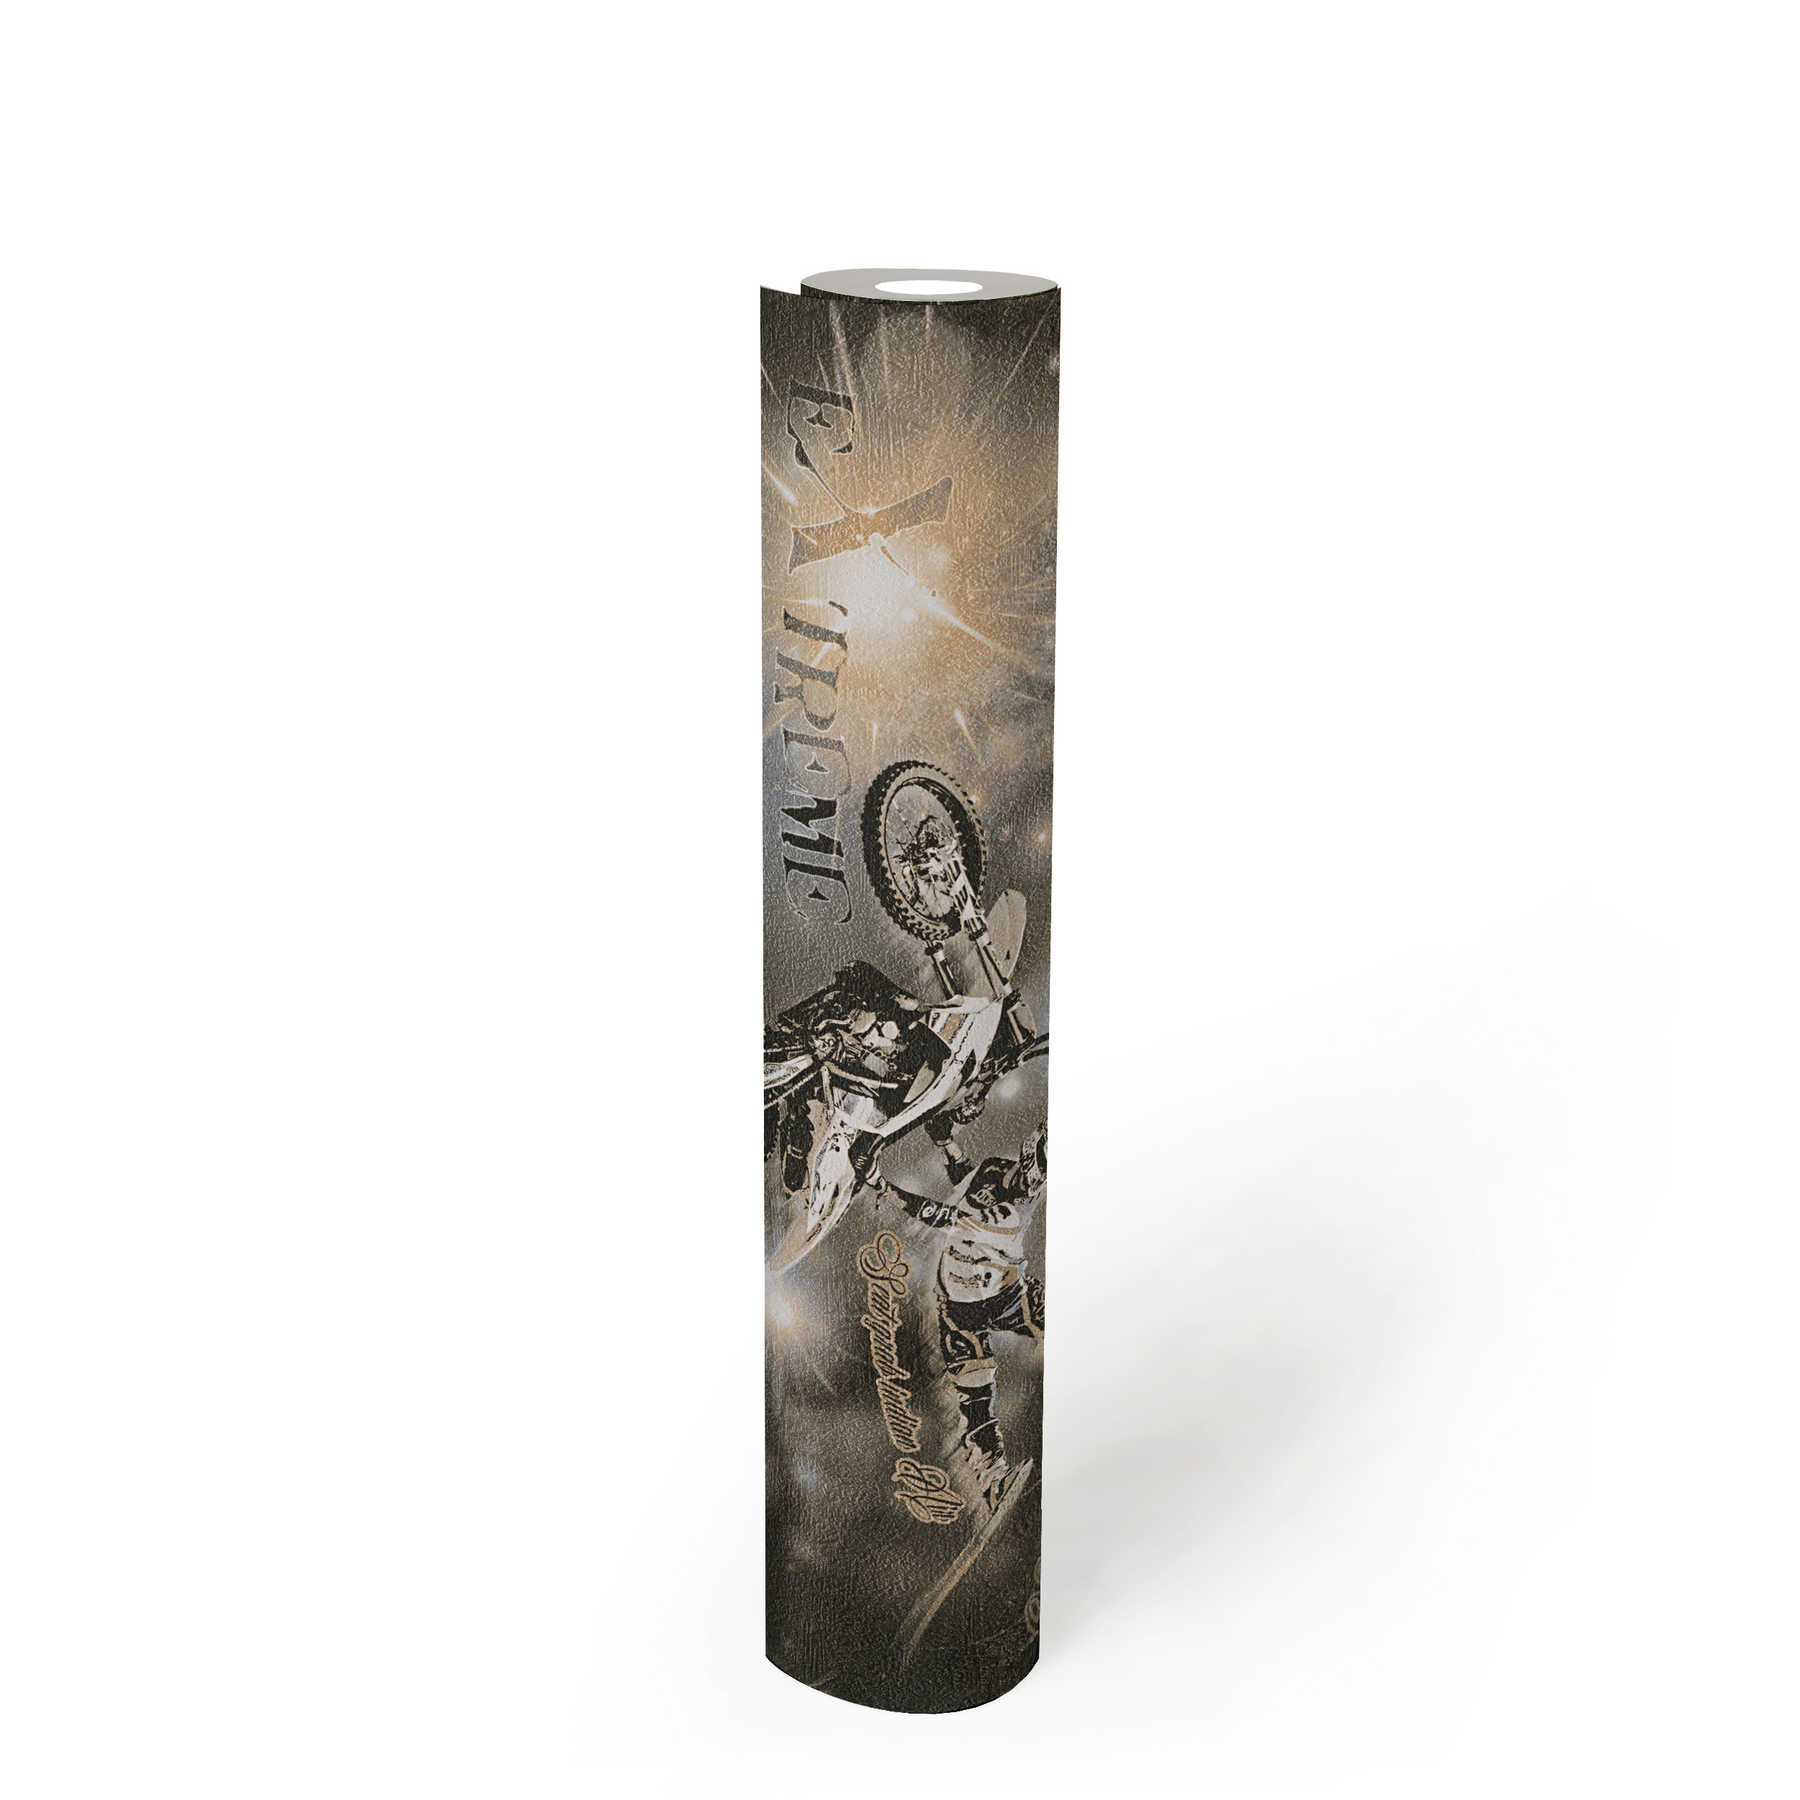             Motocross wallpaper for youth room in sepia - black, beige, gold, silver
        